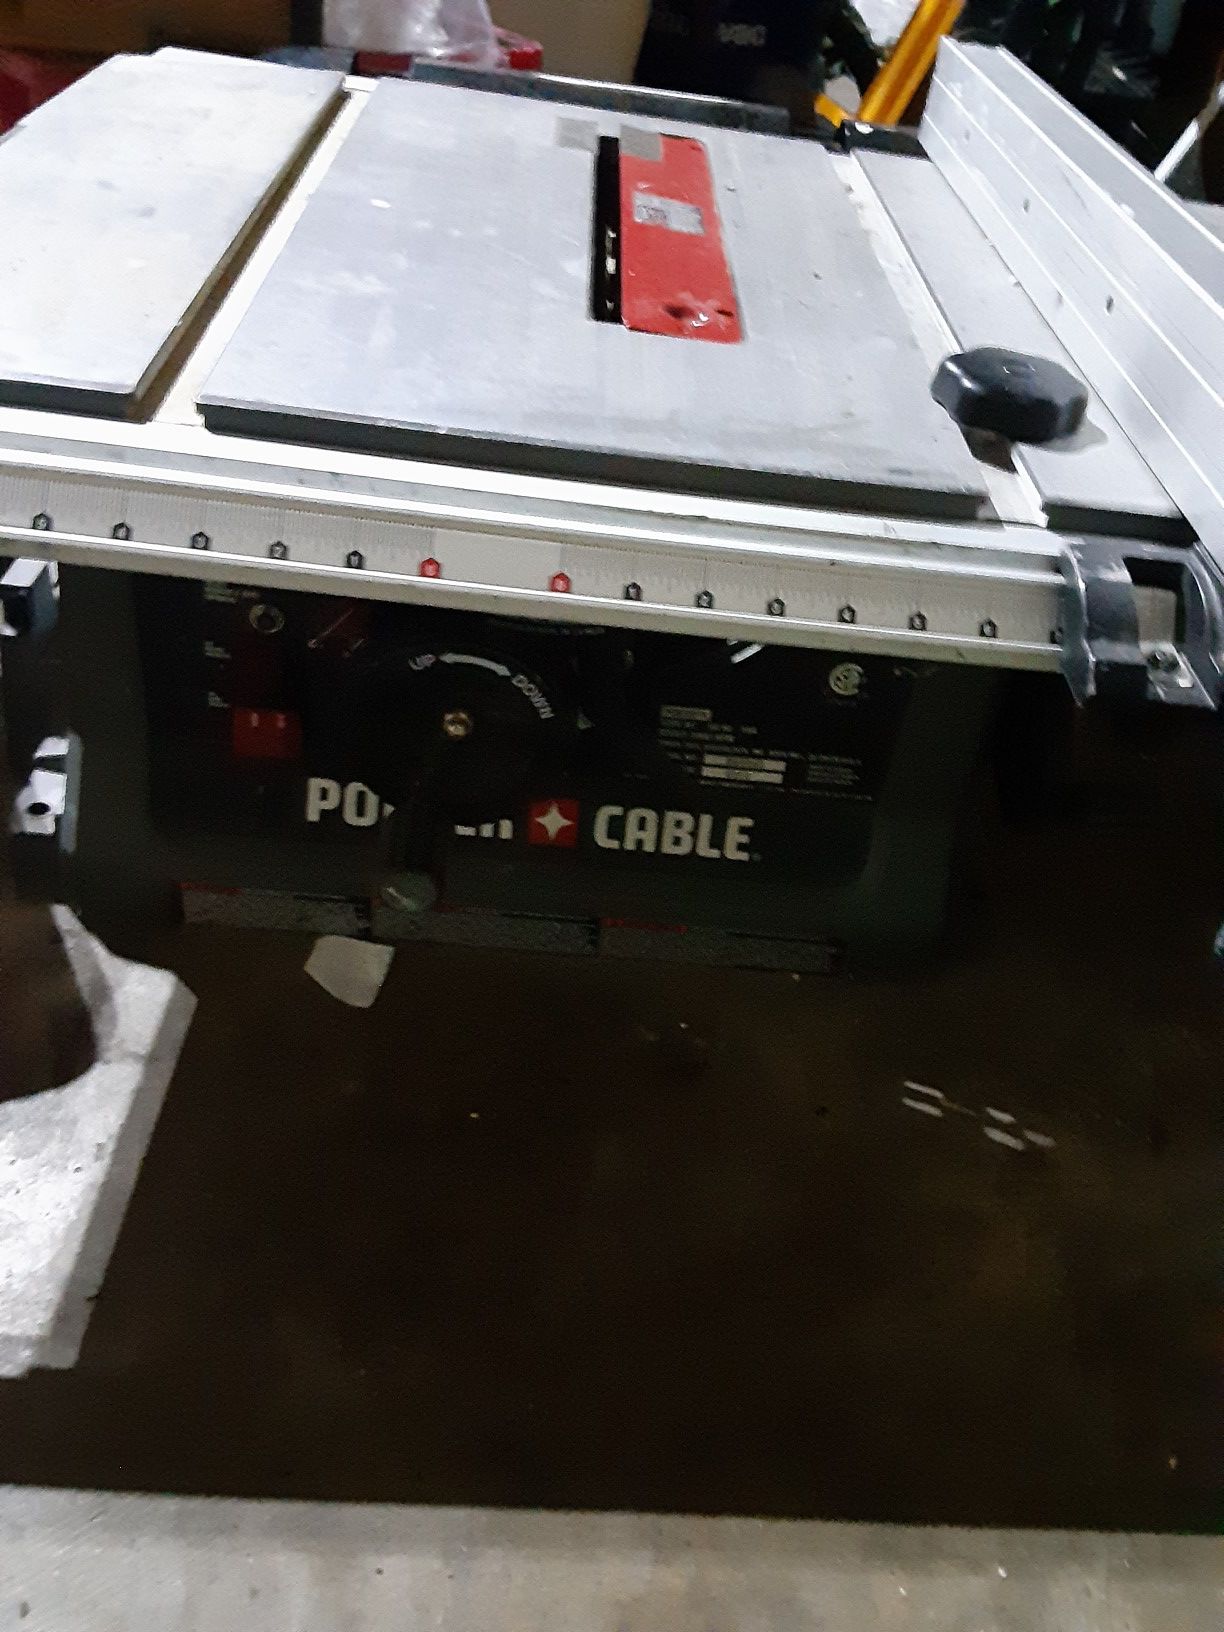 Port cable table saw